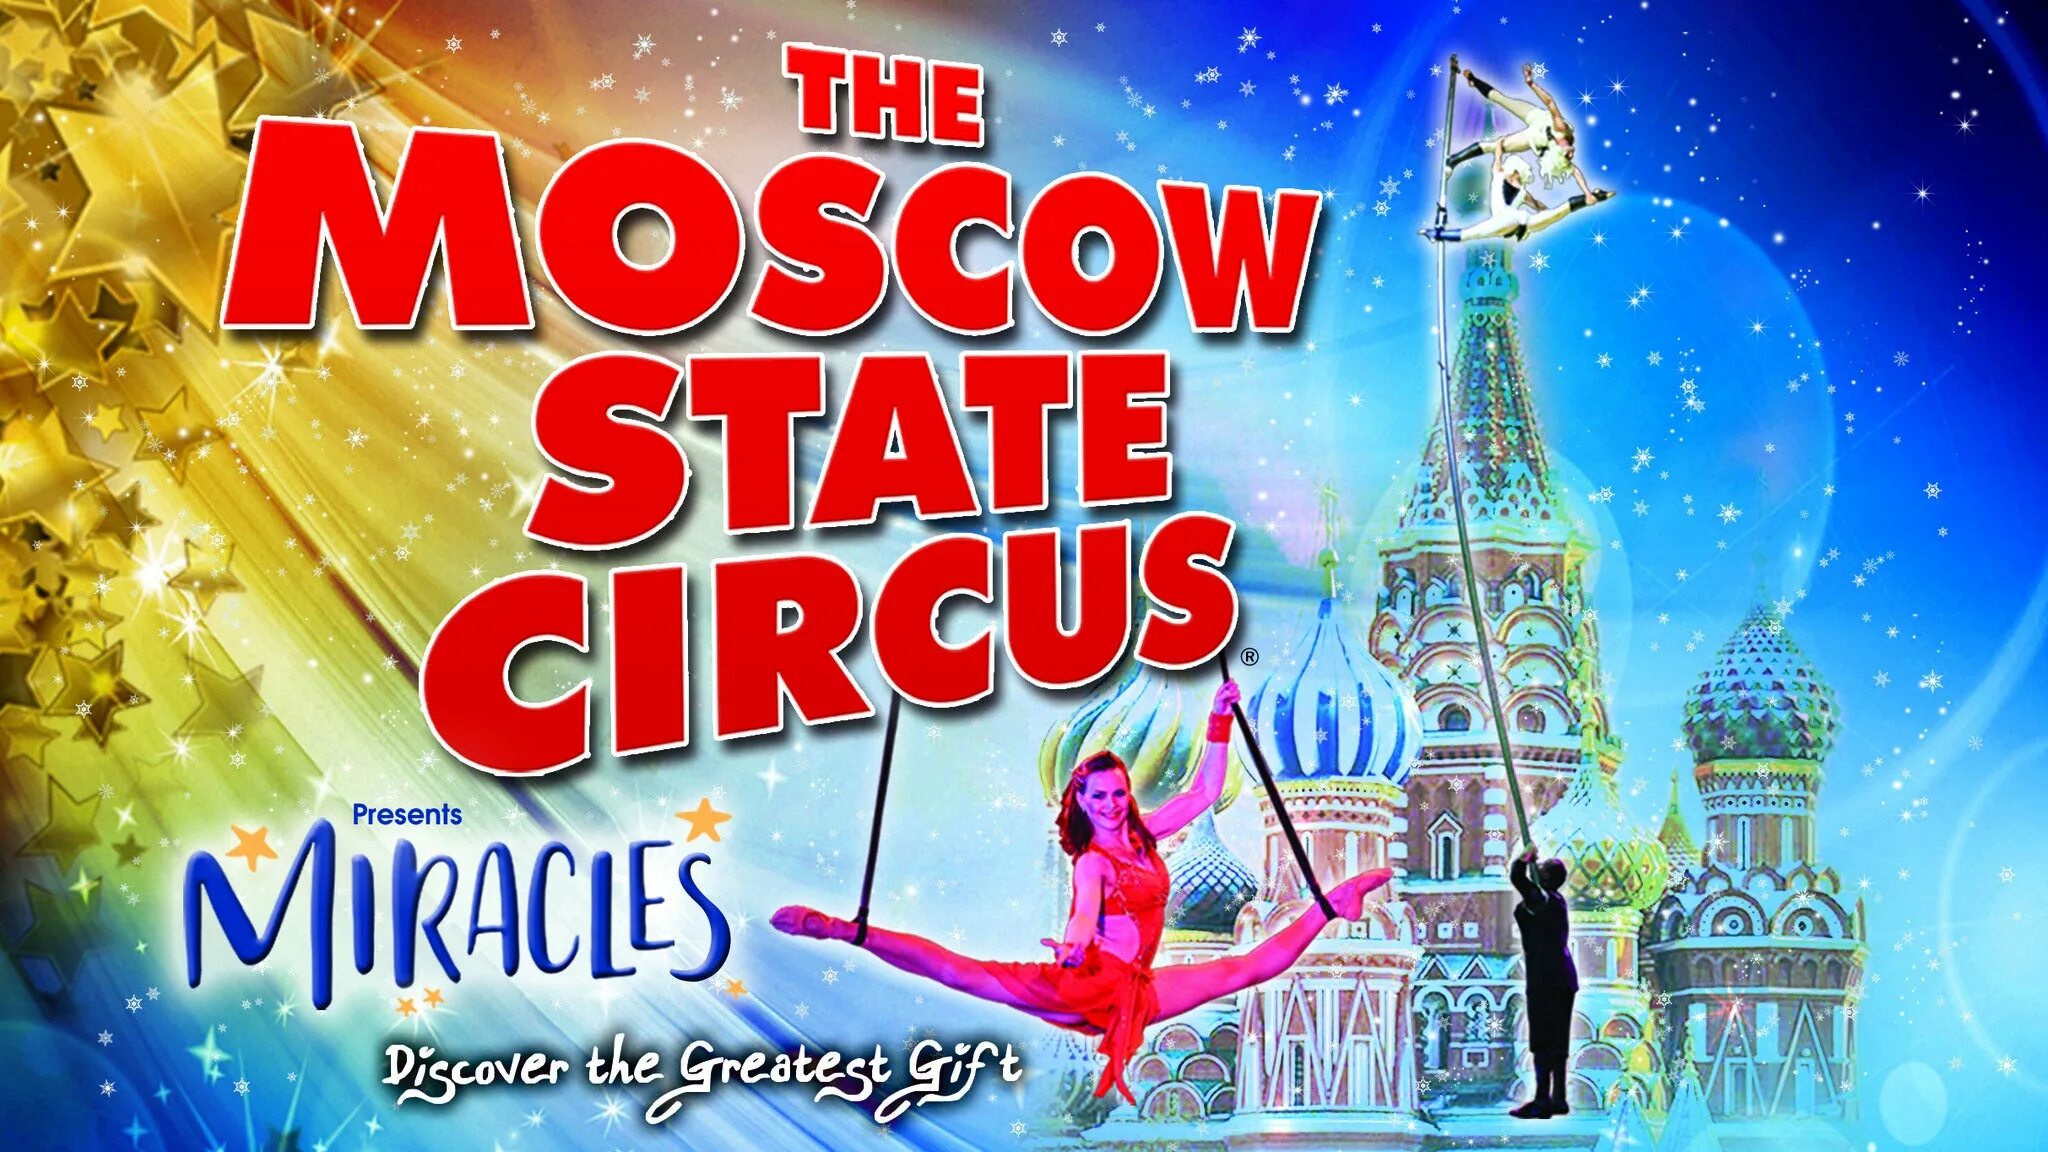 Moscow State Circus. 9 А Фе еру сшксгы. Circus (great Moscow Circus). Moscow State Circus значок.